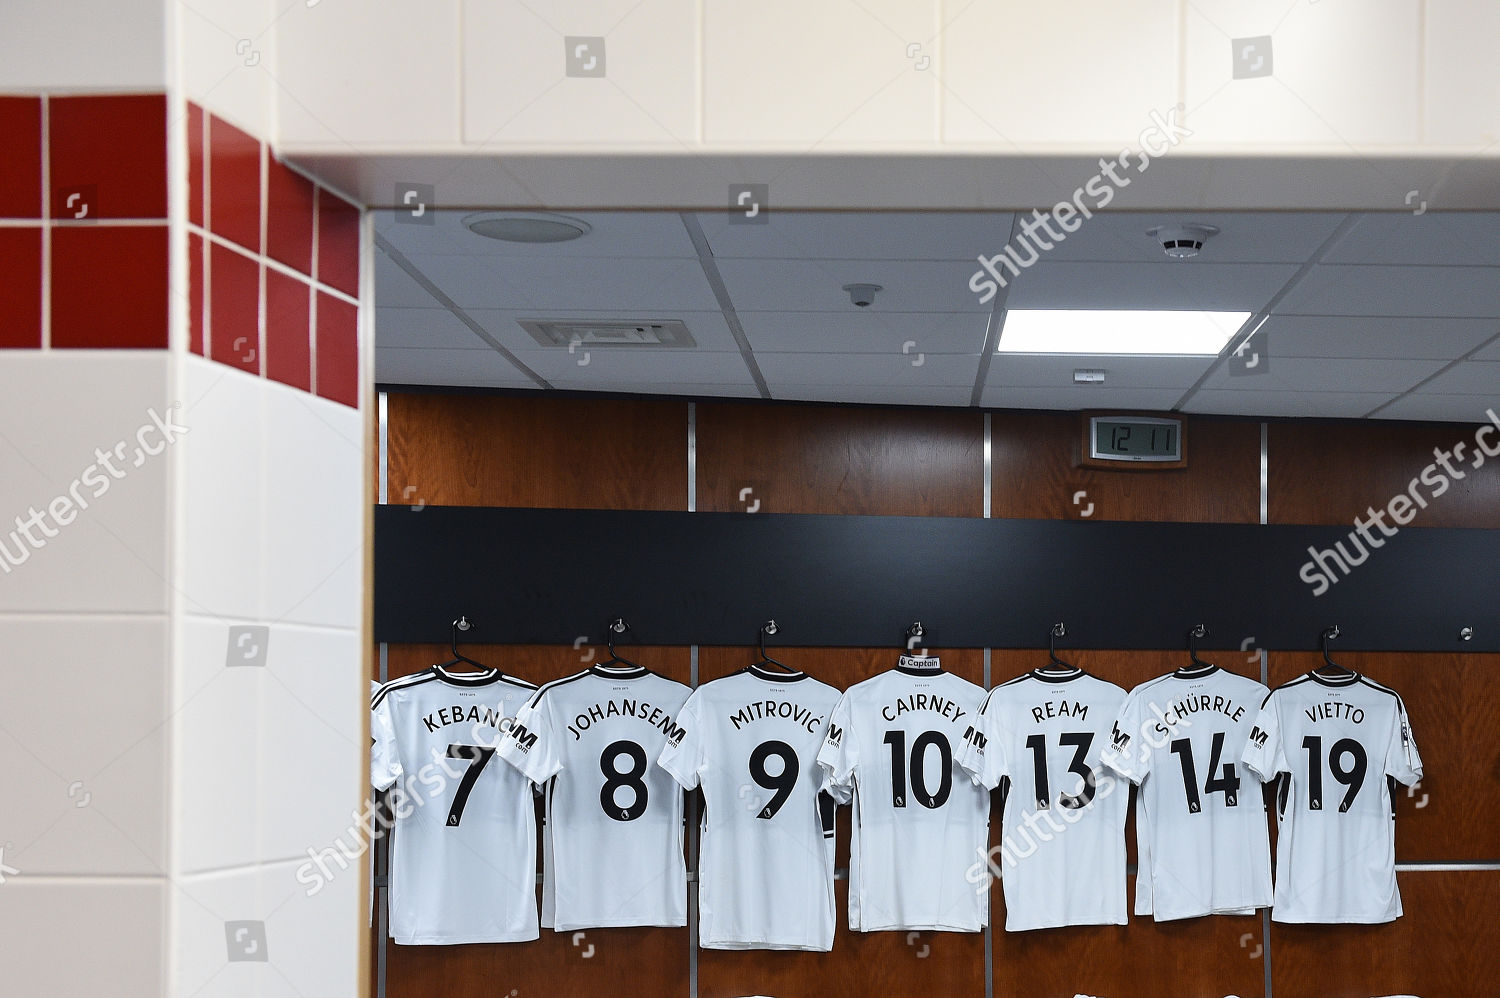 Changing room 10